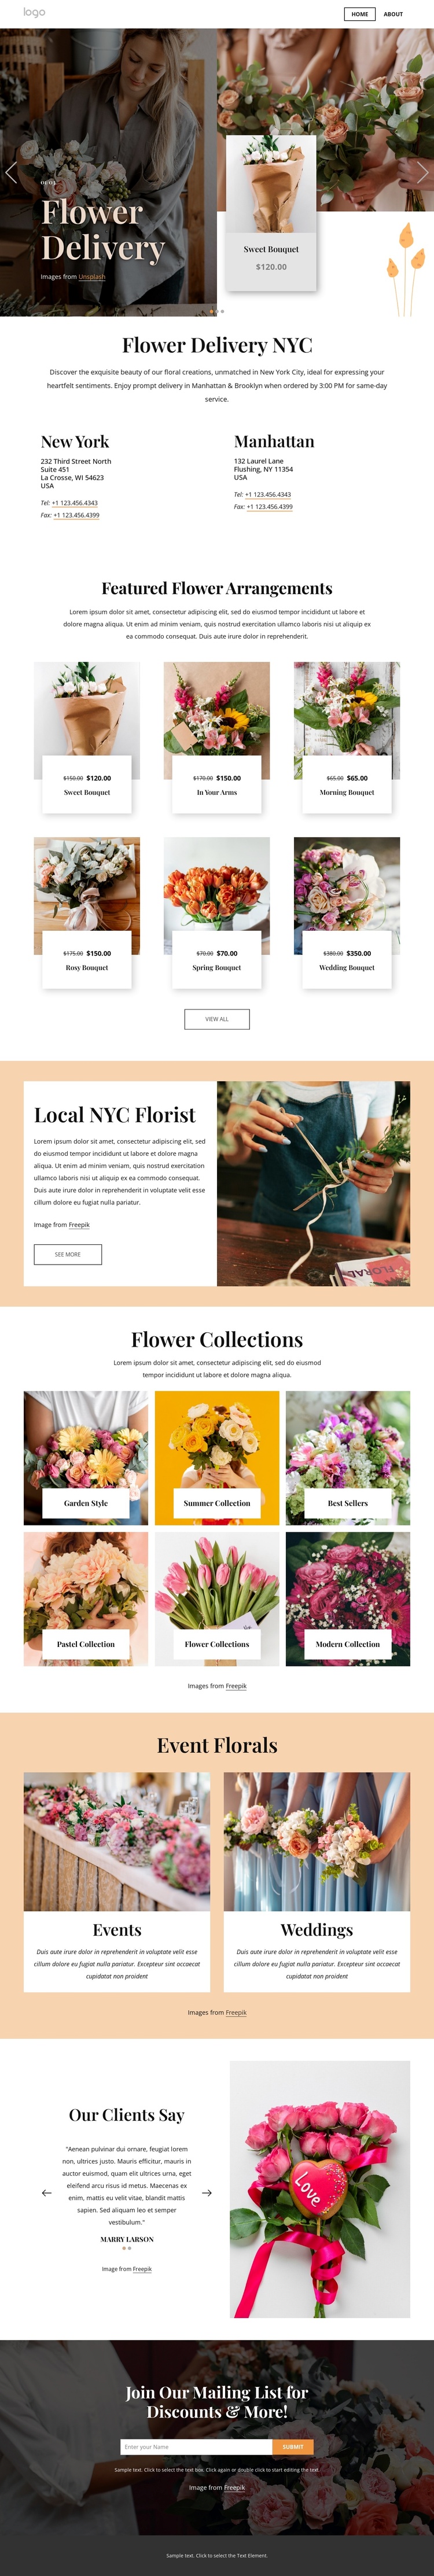 Flower delivery NYC Joomla Template